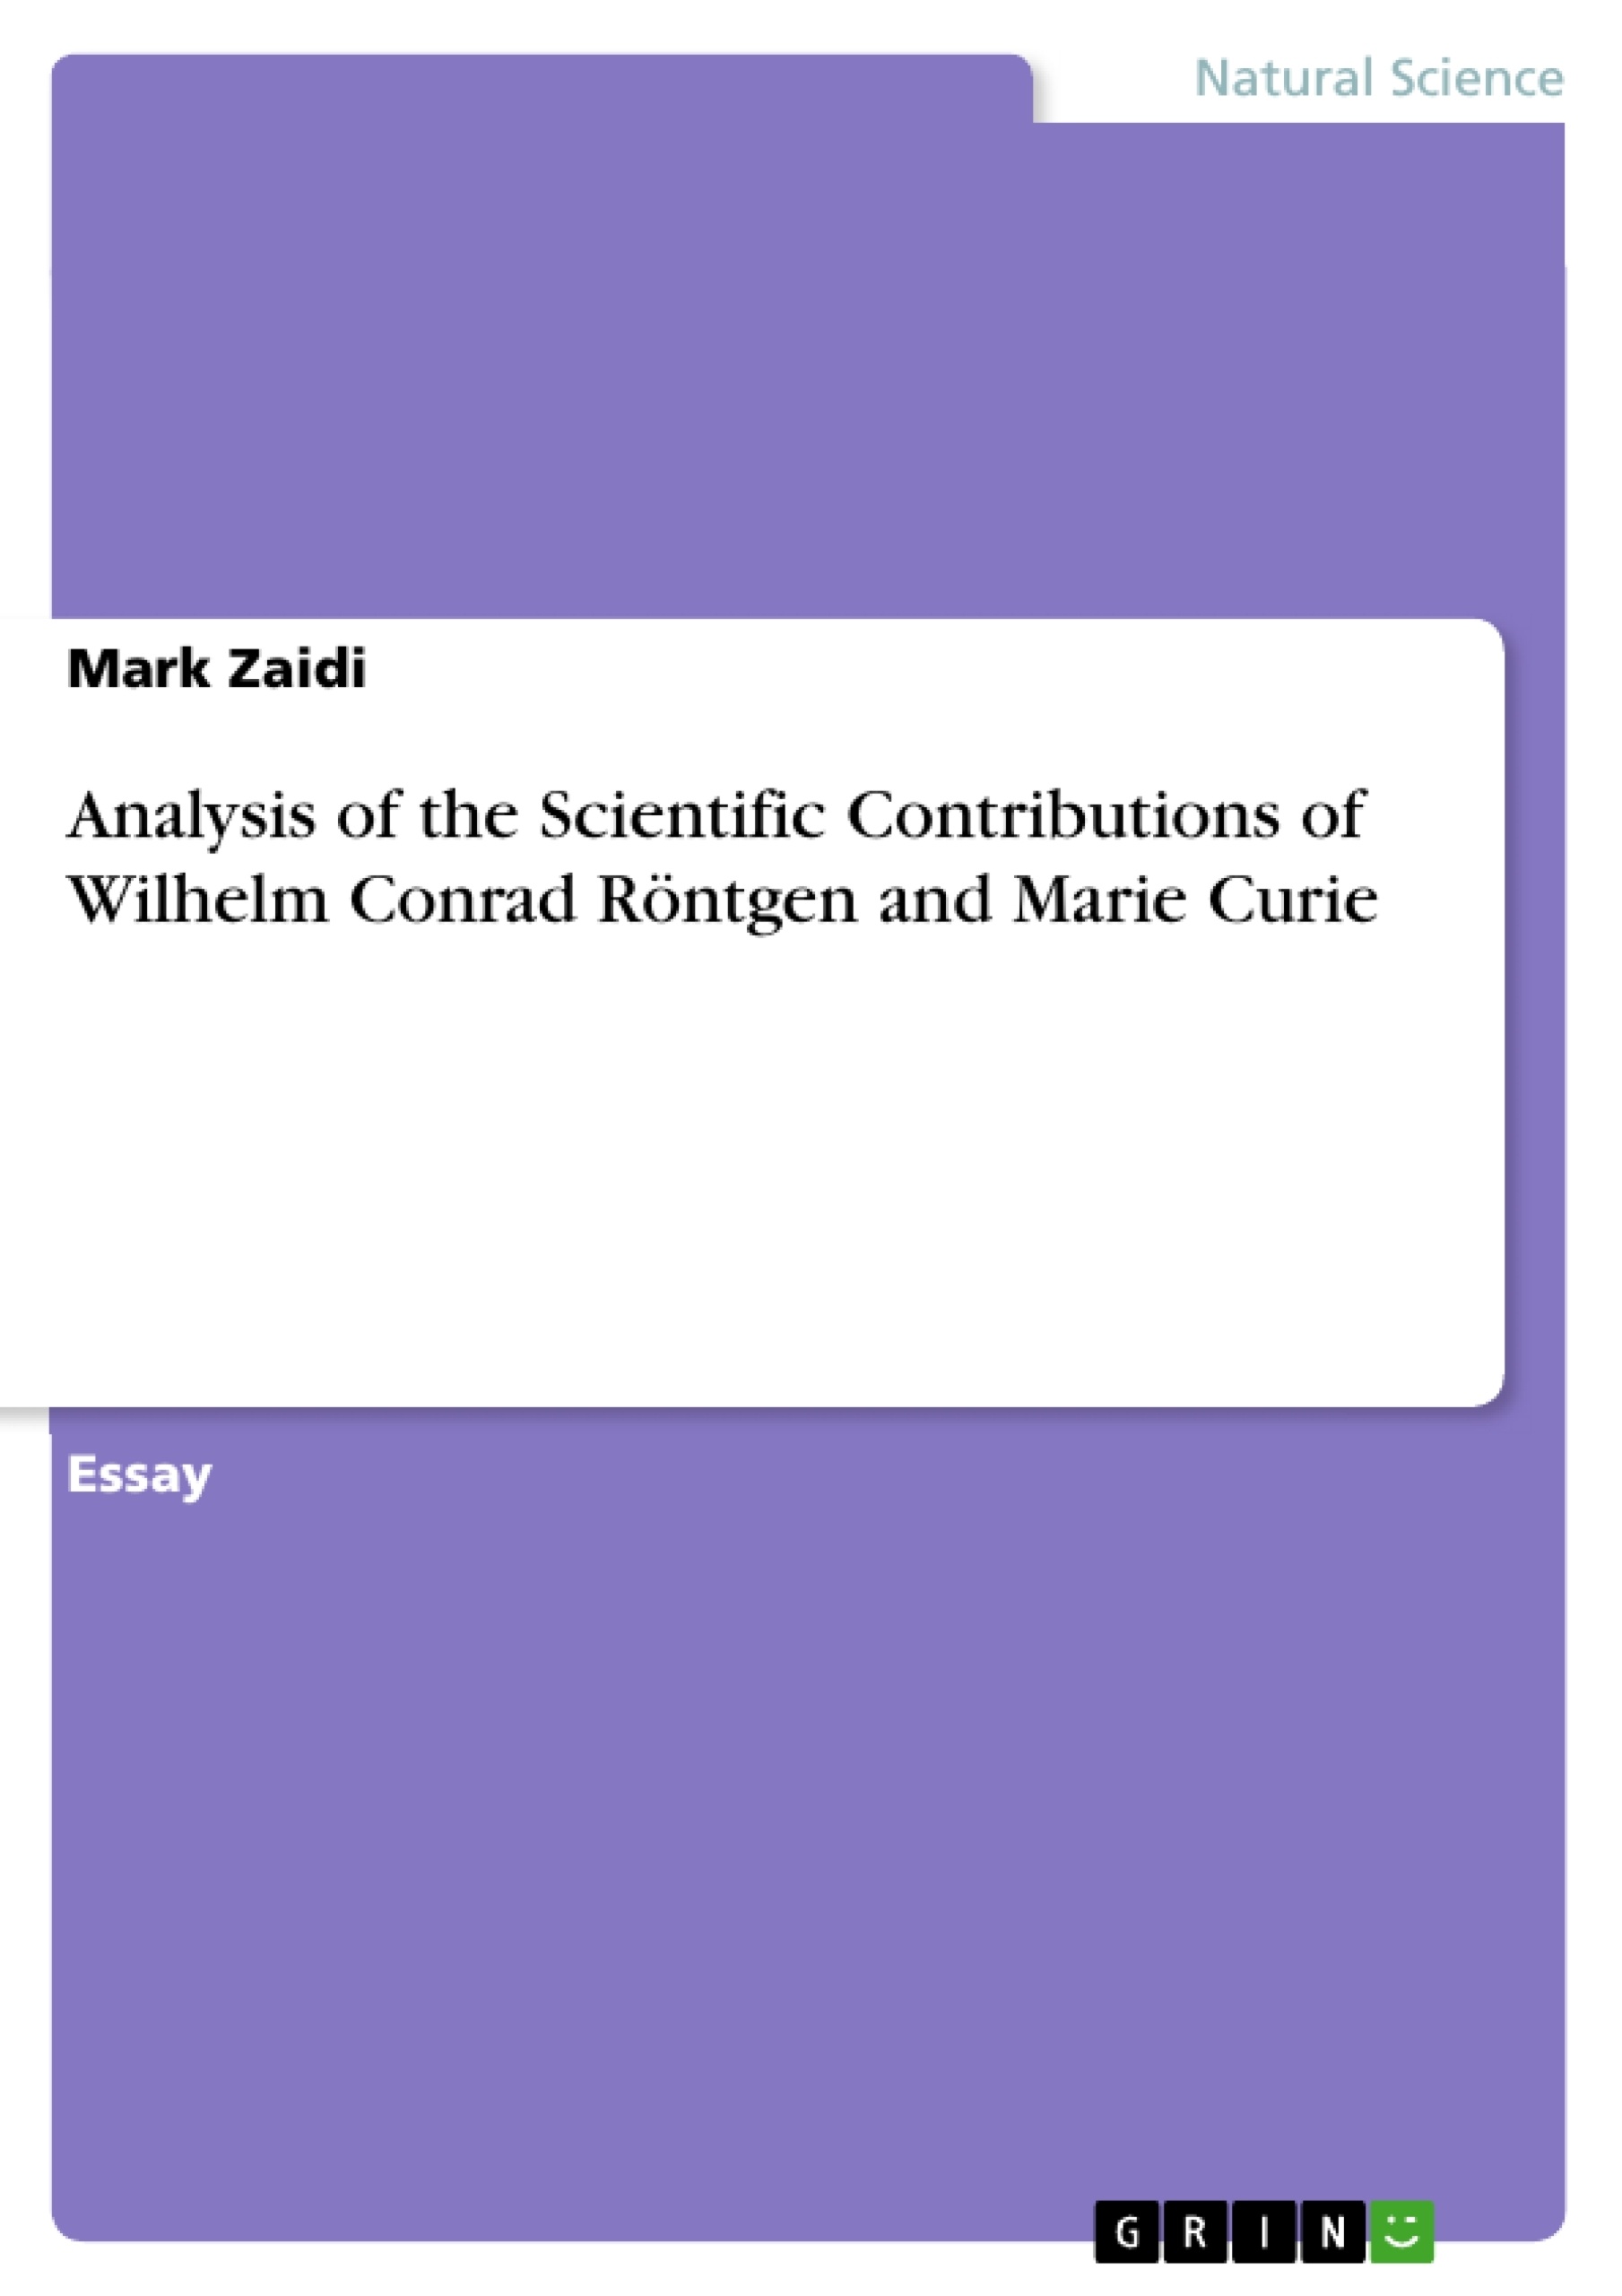 Title: Analysis of the Scientific Contributions of Wilhelm Conrad Röntgen and Marie Curie